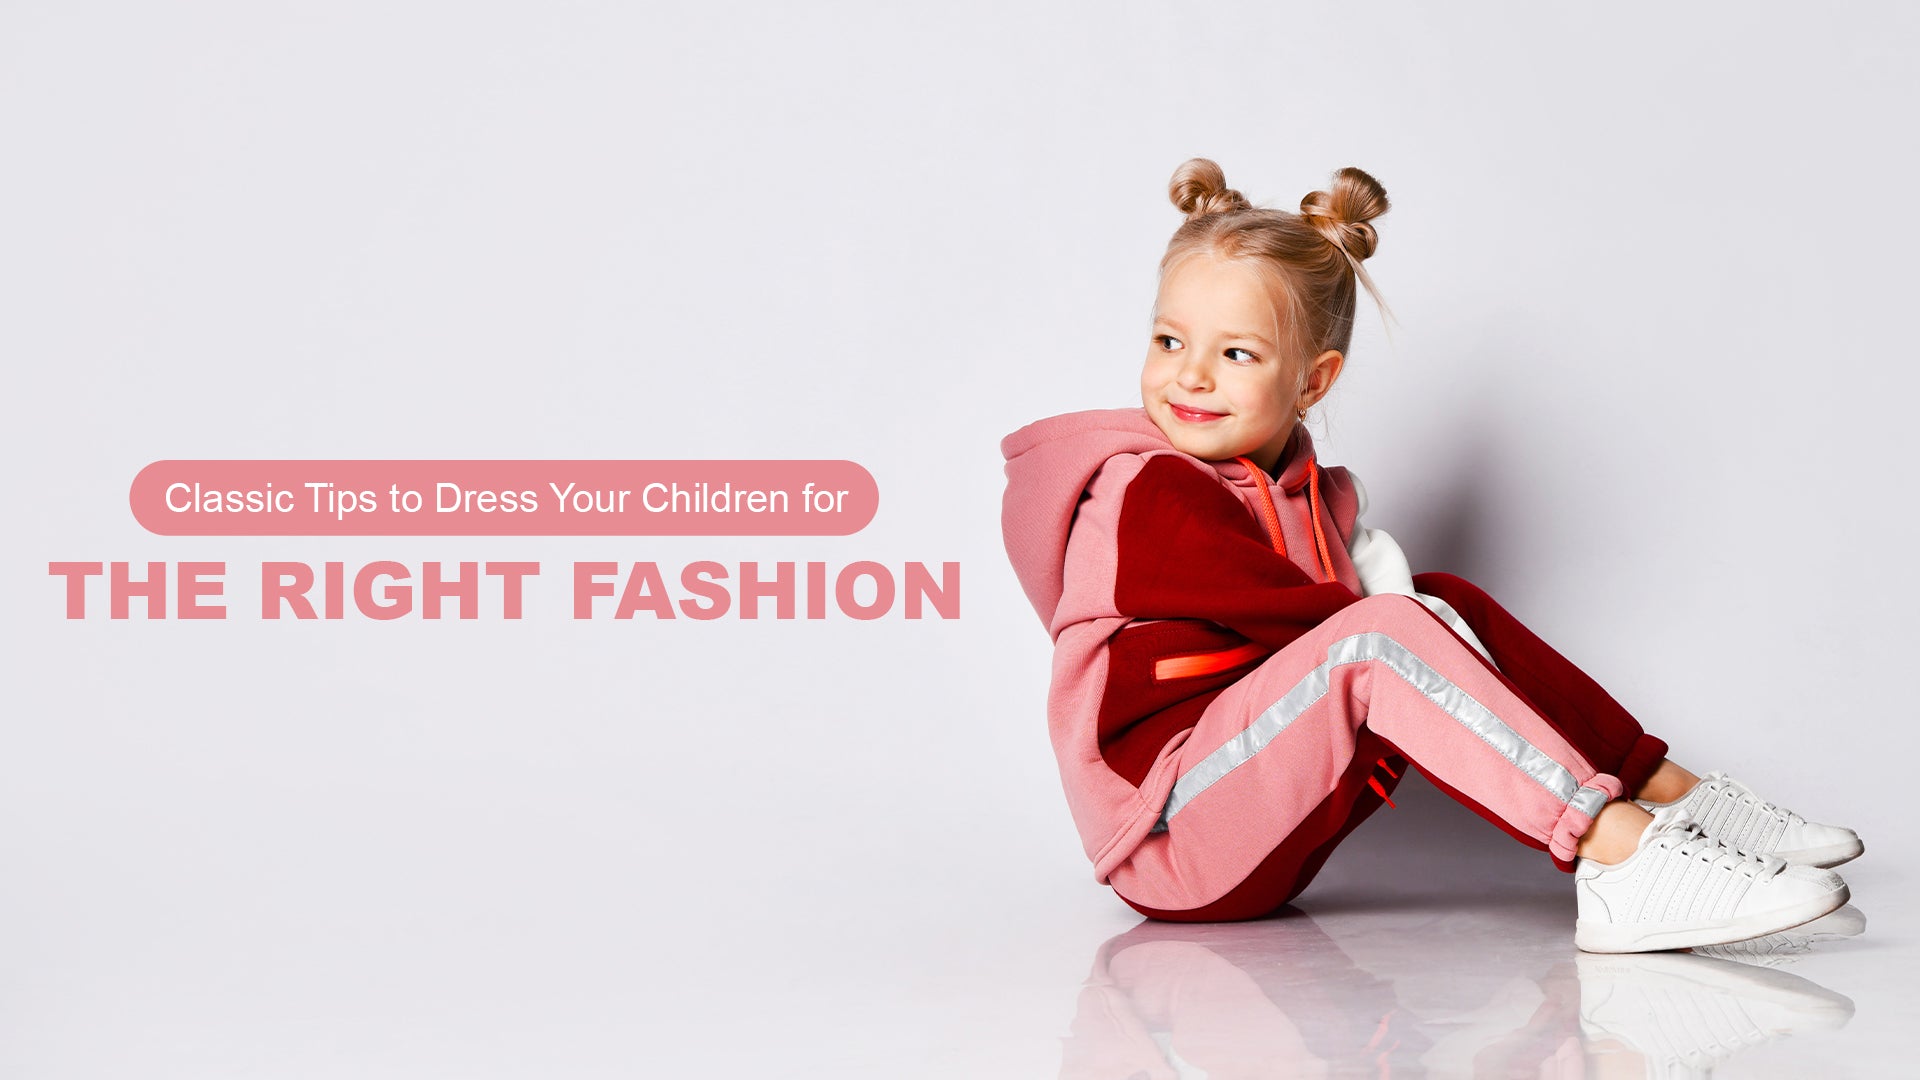 Classic Tips to Dress Your Children For the Right Fashion